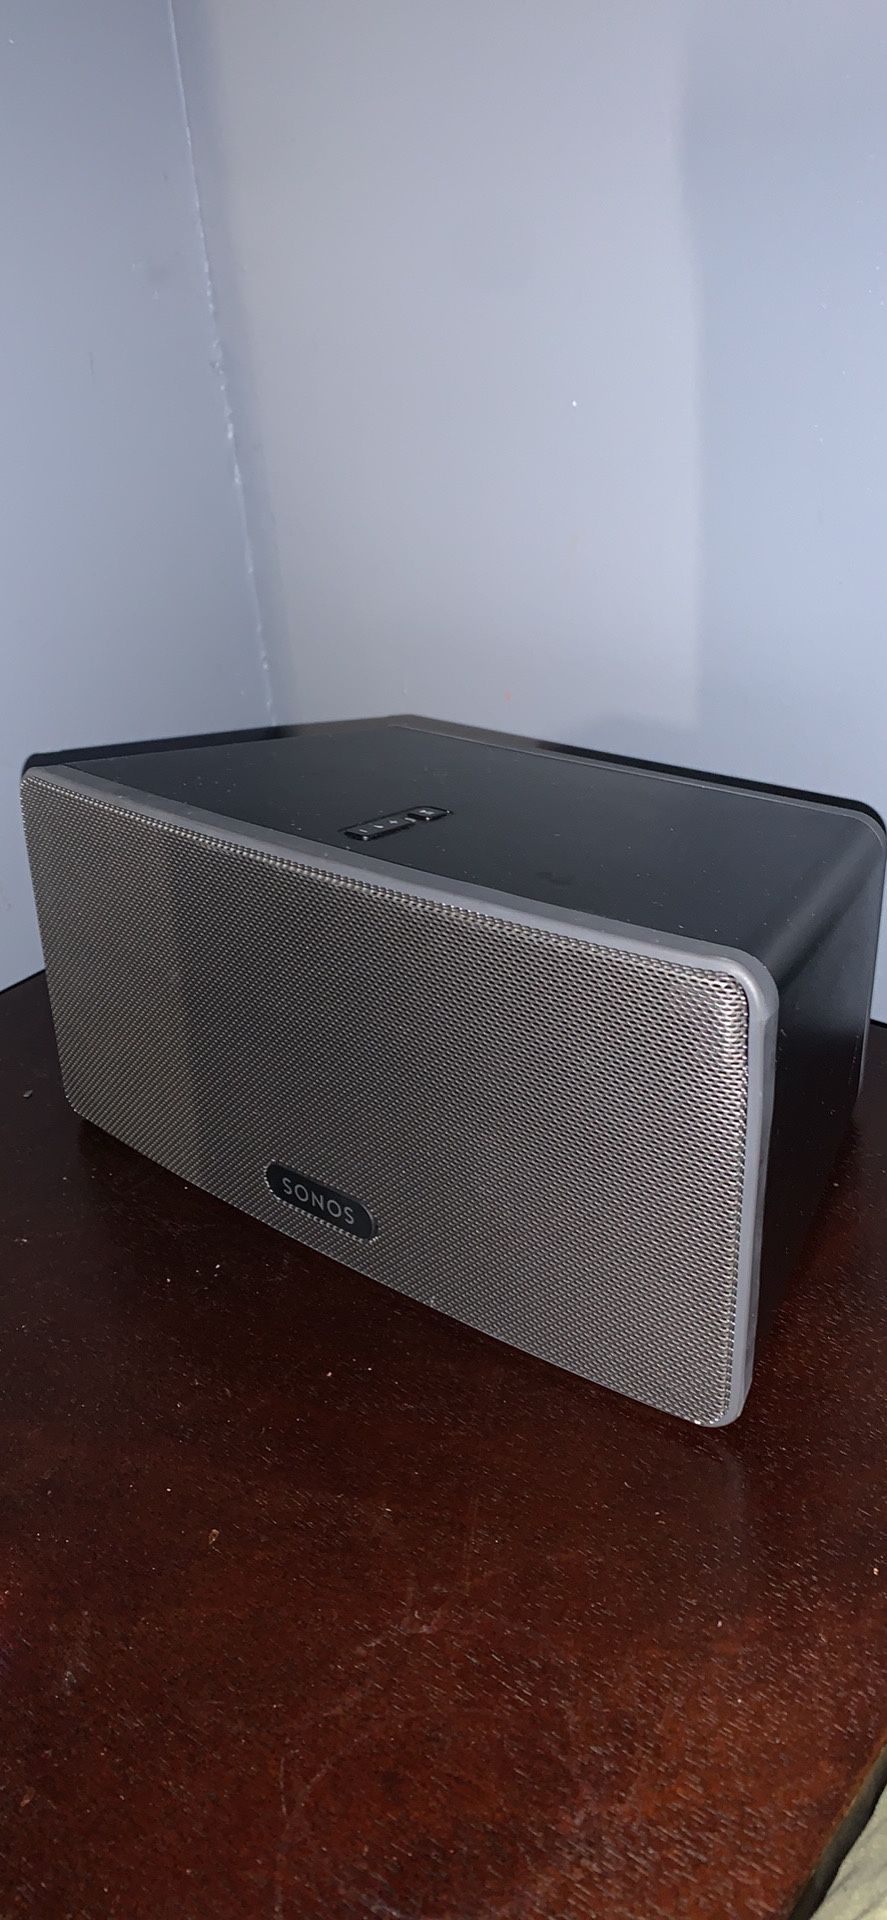 medier tang enorm Sonos Play 3 for Sale in Brooklyn, NY - OfferUp